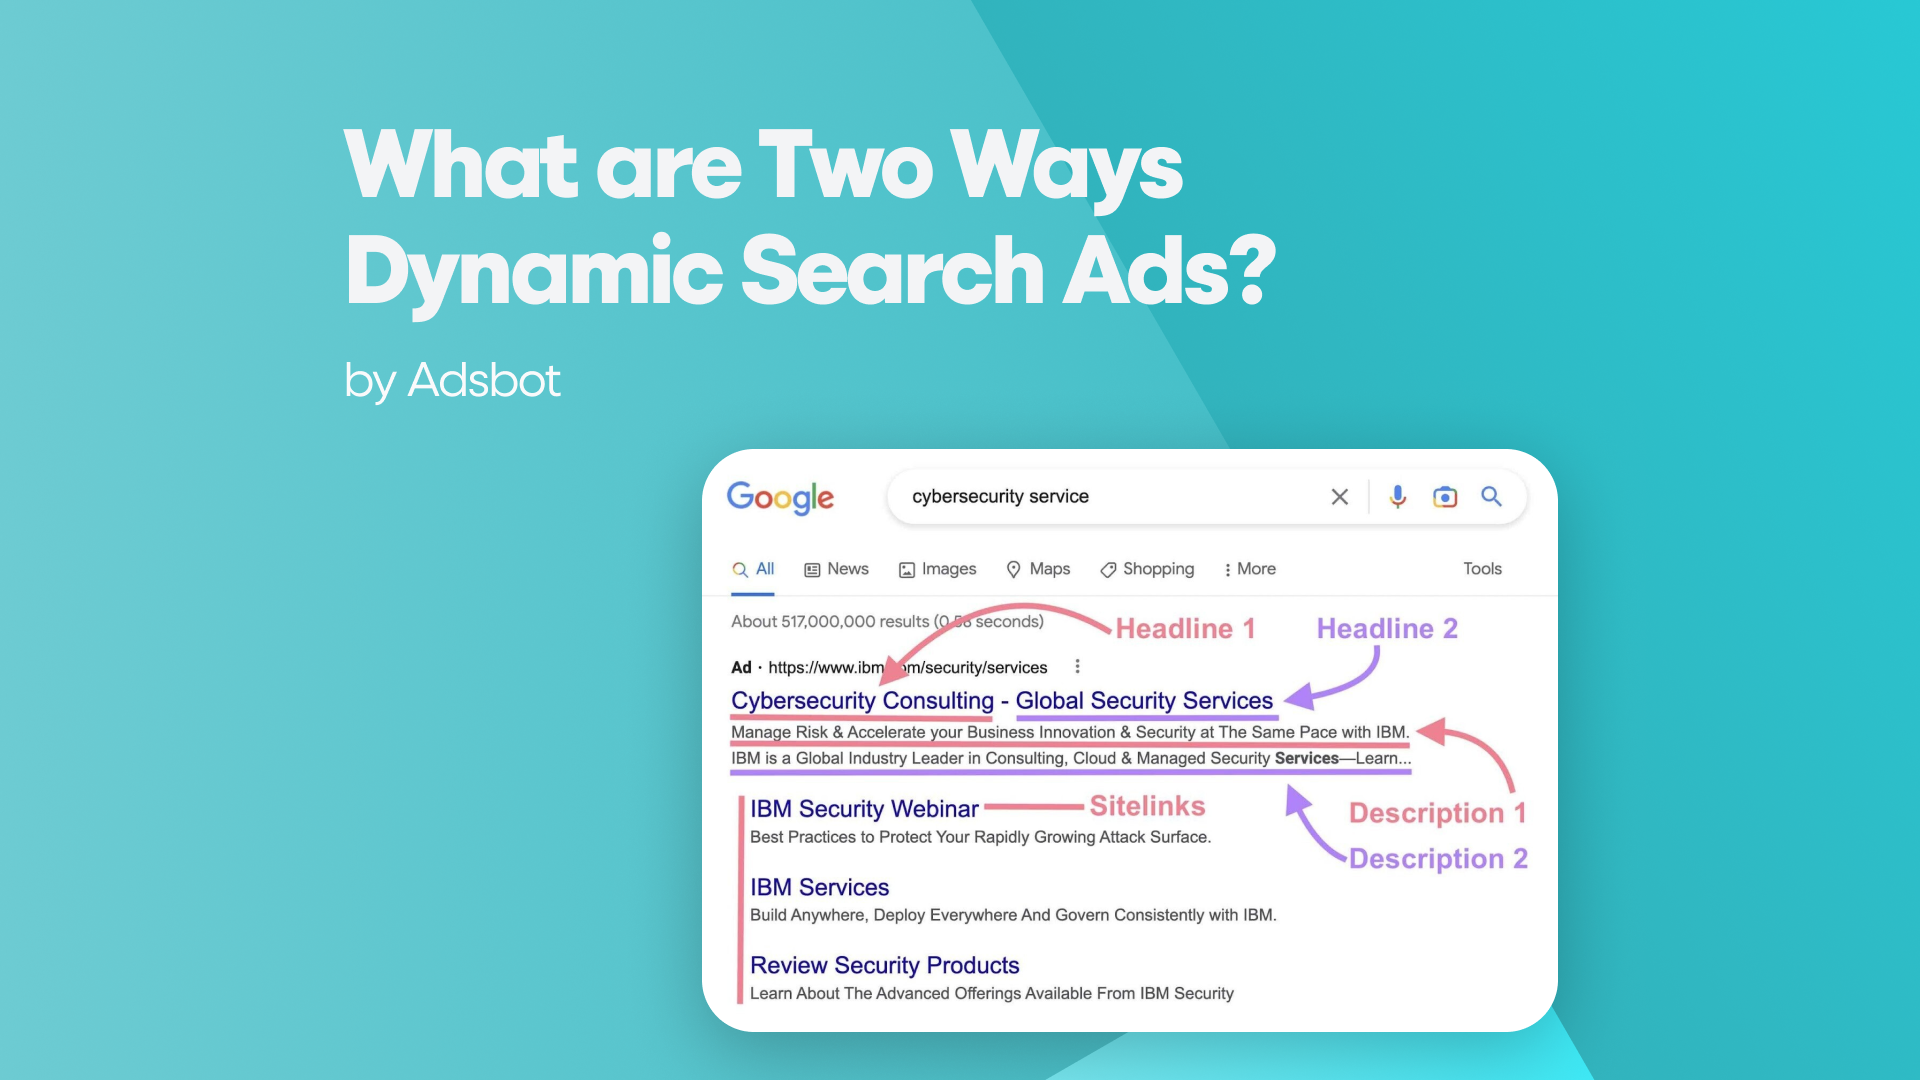 What are Two Ways Dynamic Search Ads?